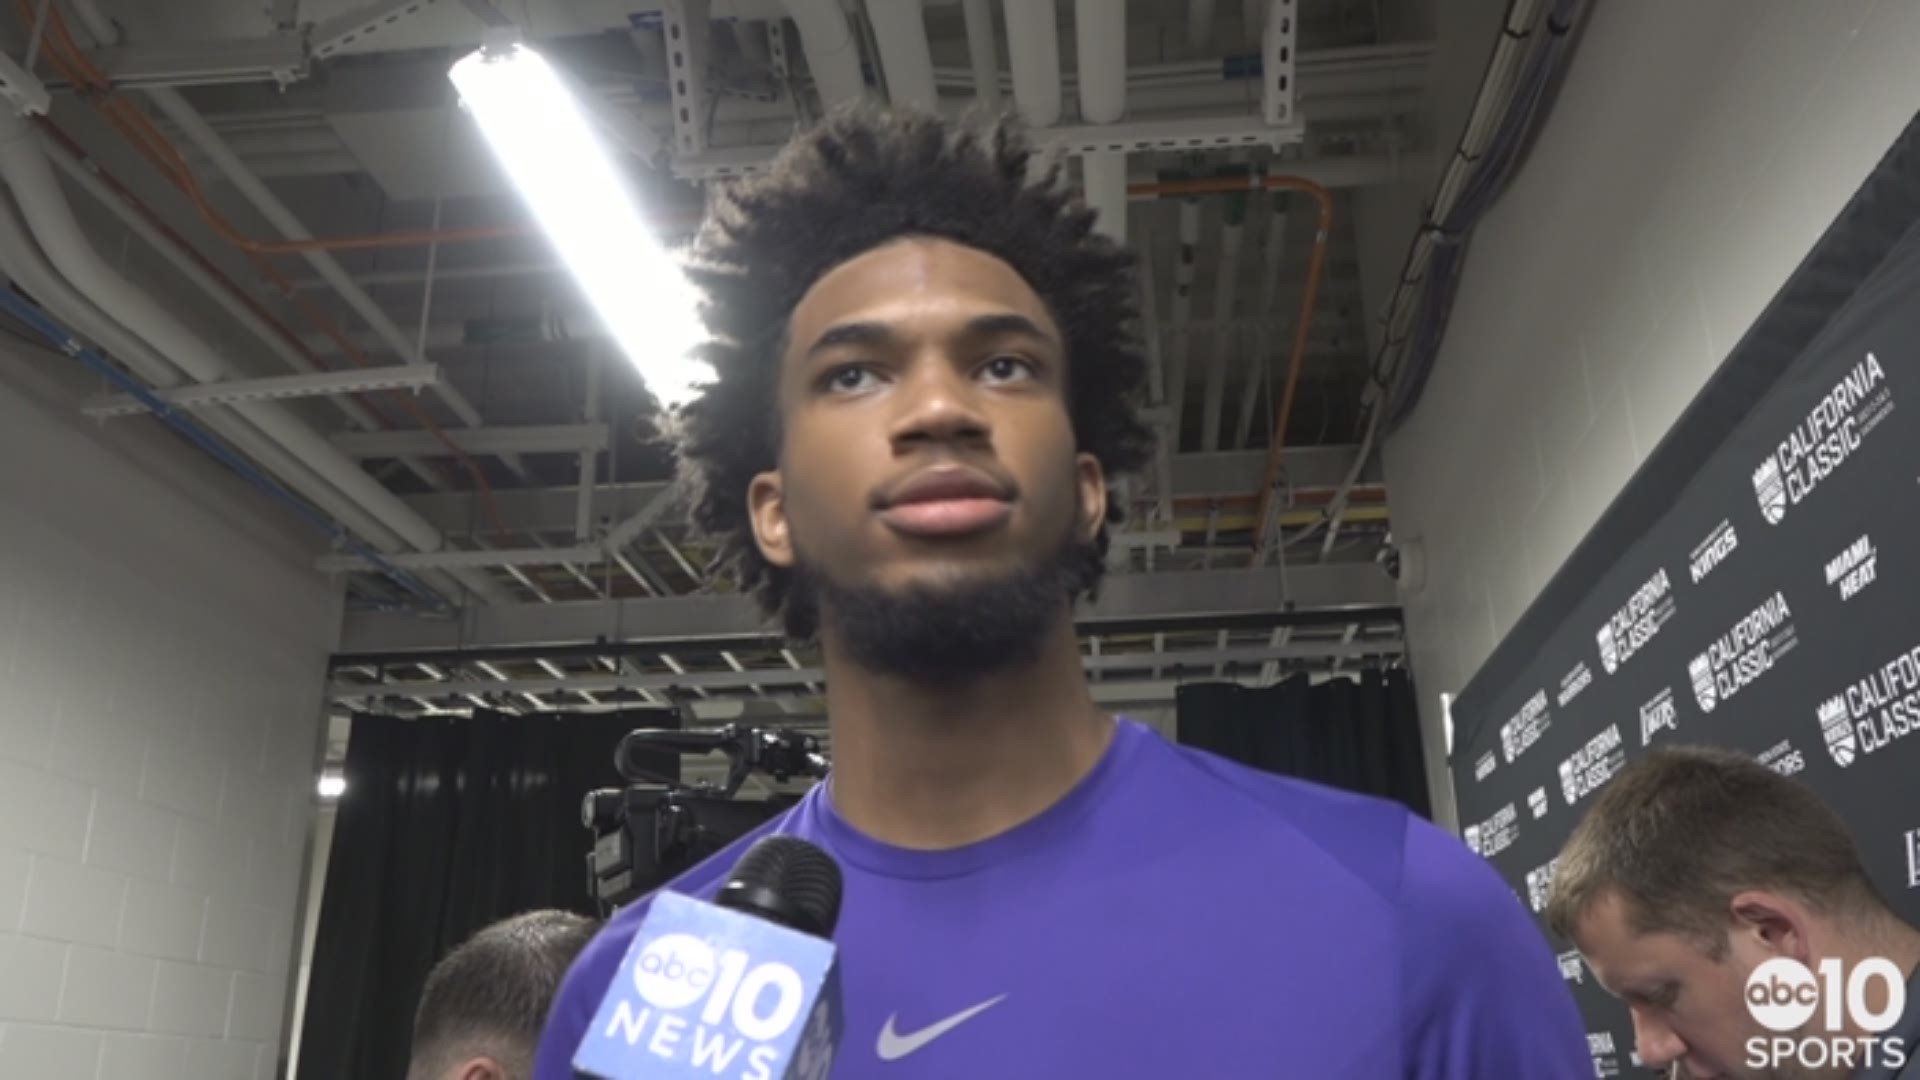 Rookie Marvin Bagley III discusses his first NBA experience coming in Sacramento in front of Kings fans, his memorable dunk in the first quarter and the win over the Los Angeles Lakers in their first summer league game on Monday.